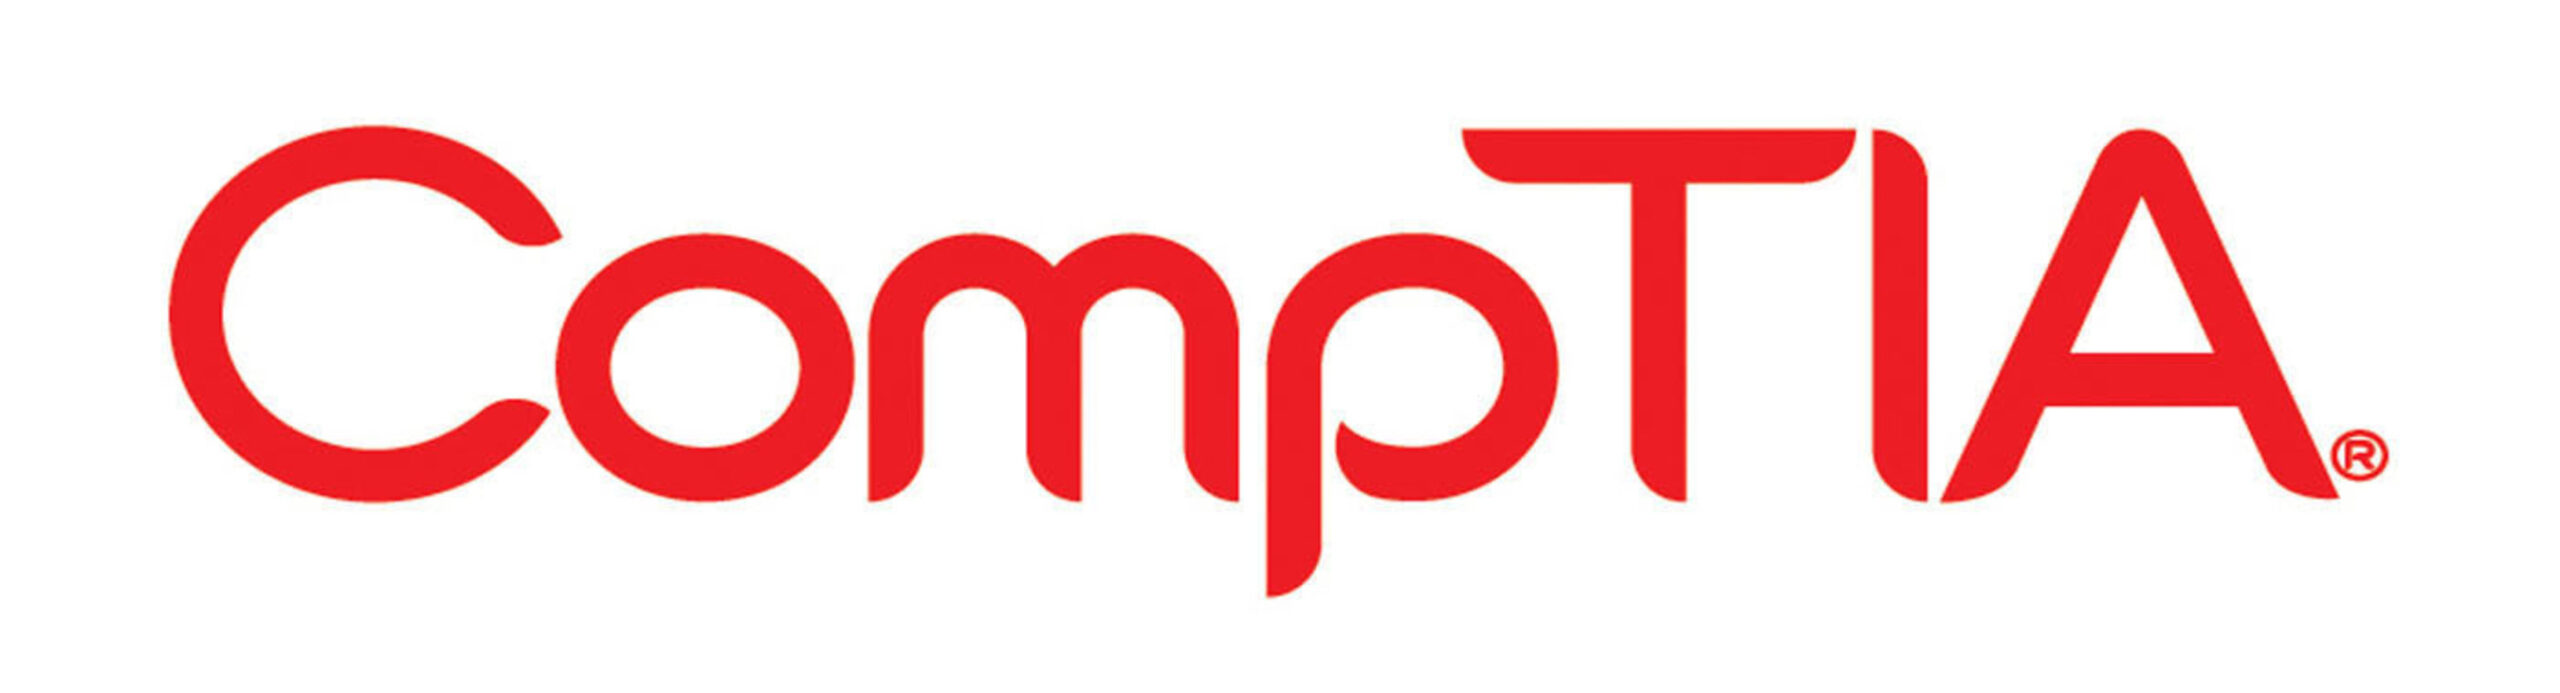 CompTIA is the voice of the world's information technology industry. (PRNewsFoto/CompTIA) (PRNewsFoto/)